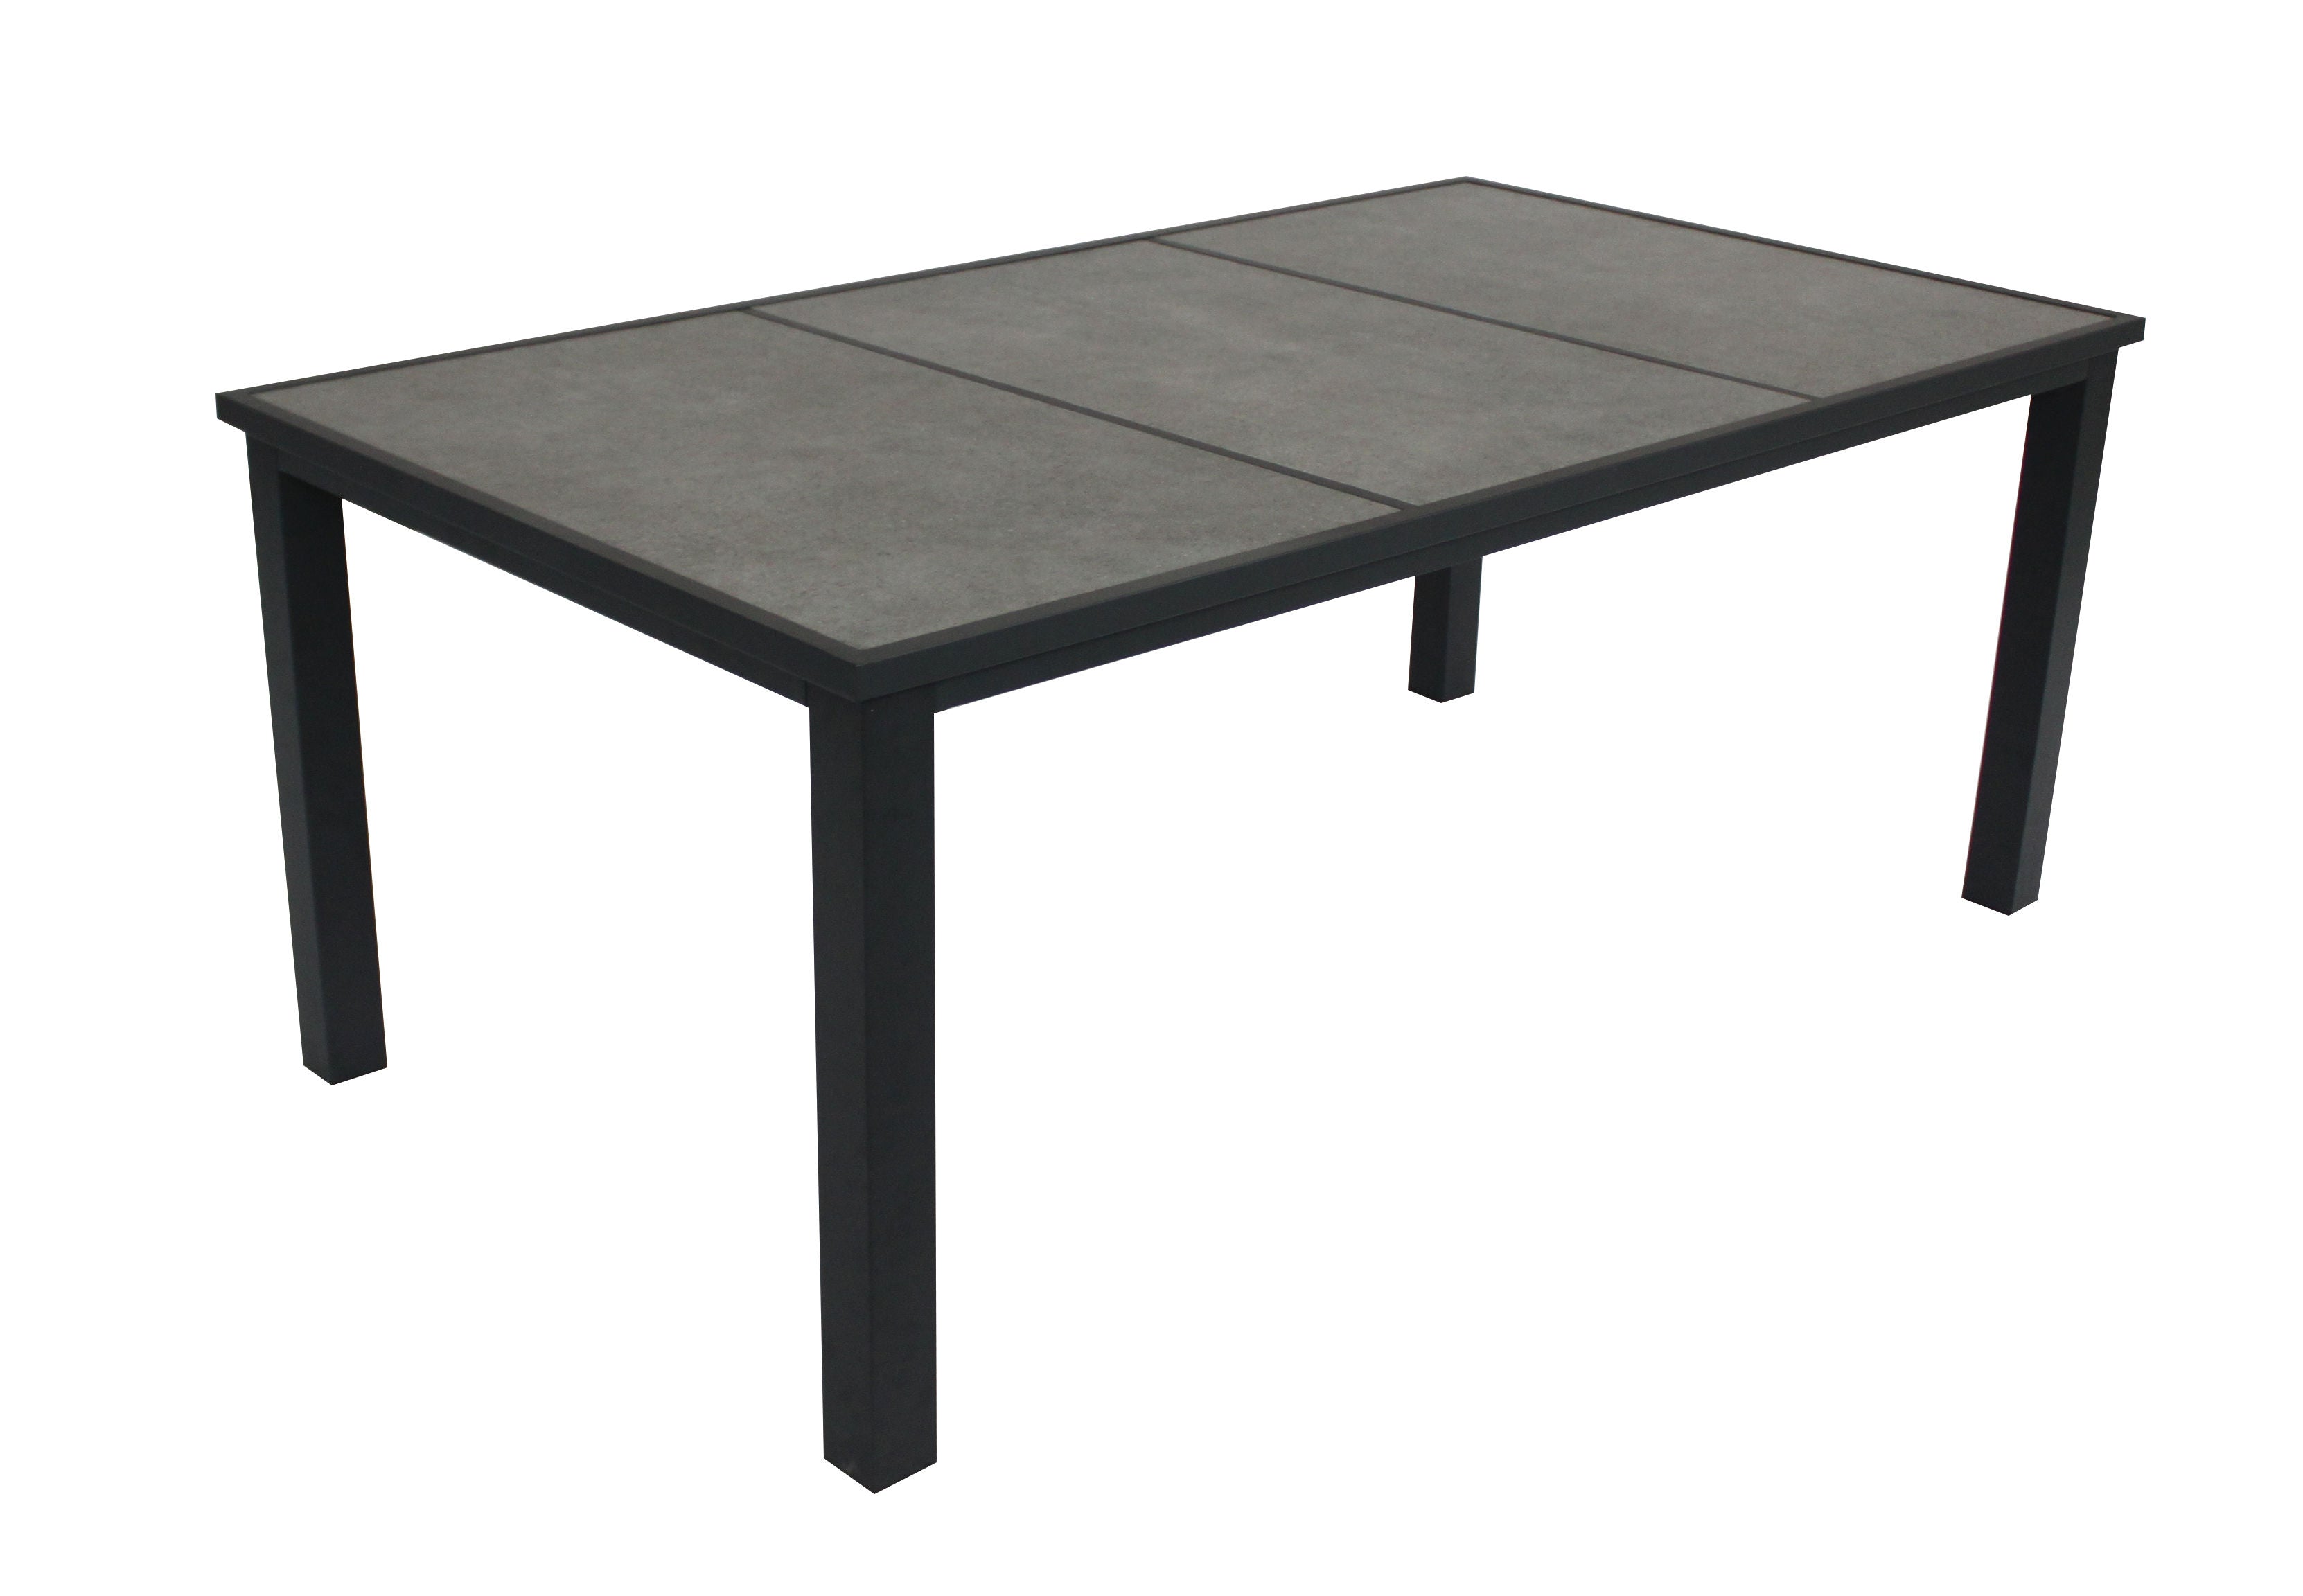 MOSS MOSS-0824 - Key West Collection, Black aluminum rectangular table with 3 grey large ceramic panels for table top 74" x 42 3/8" x H 29.1"